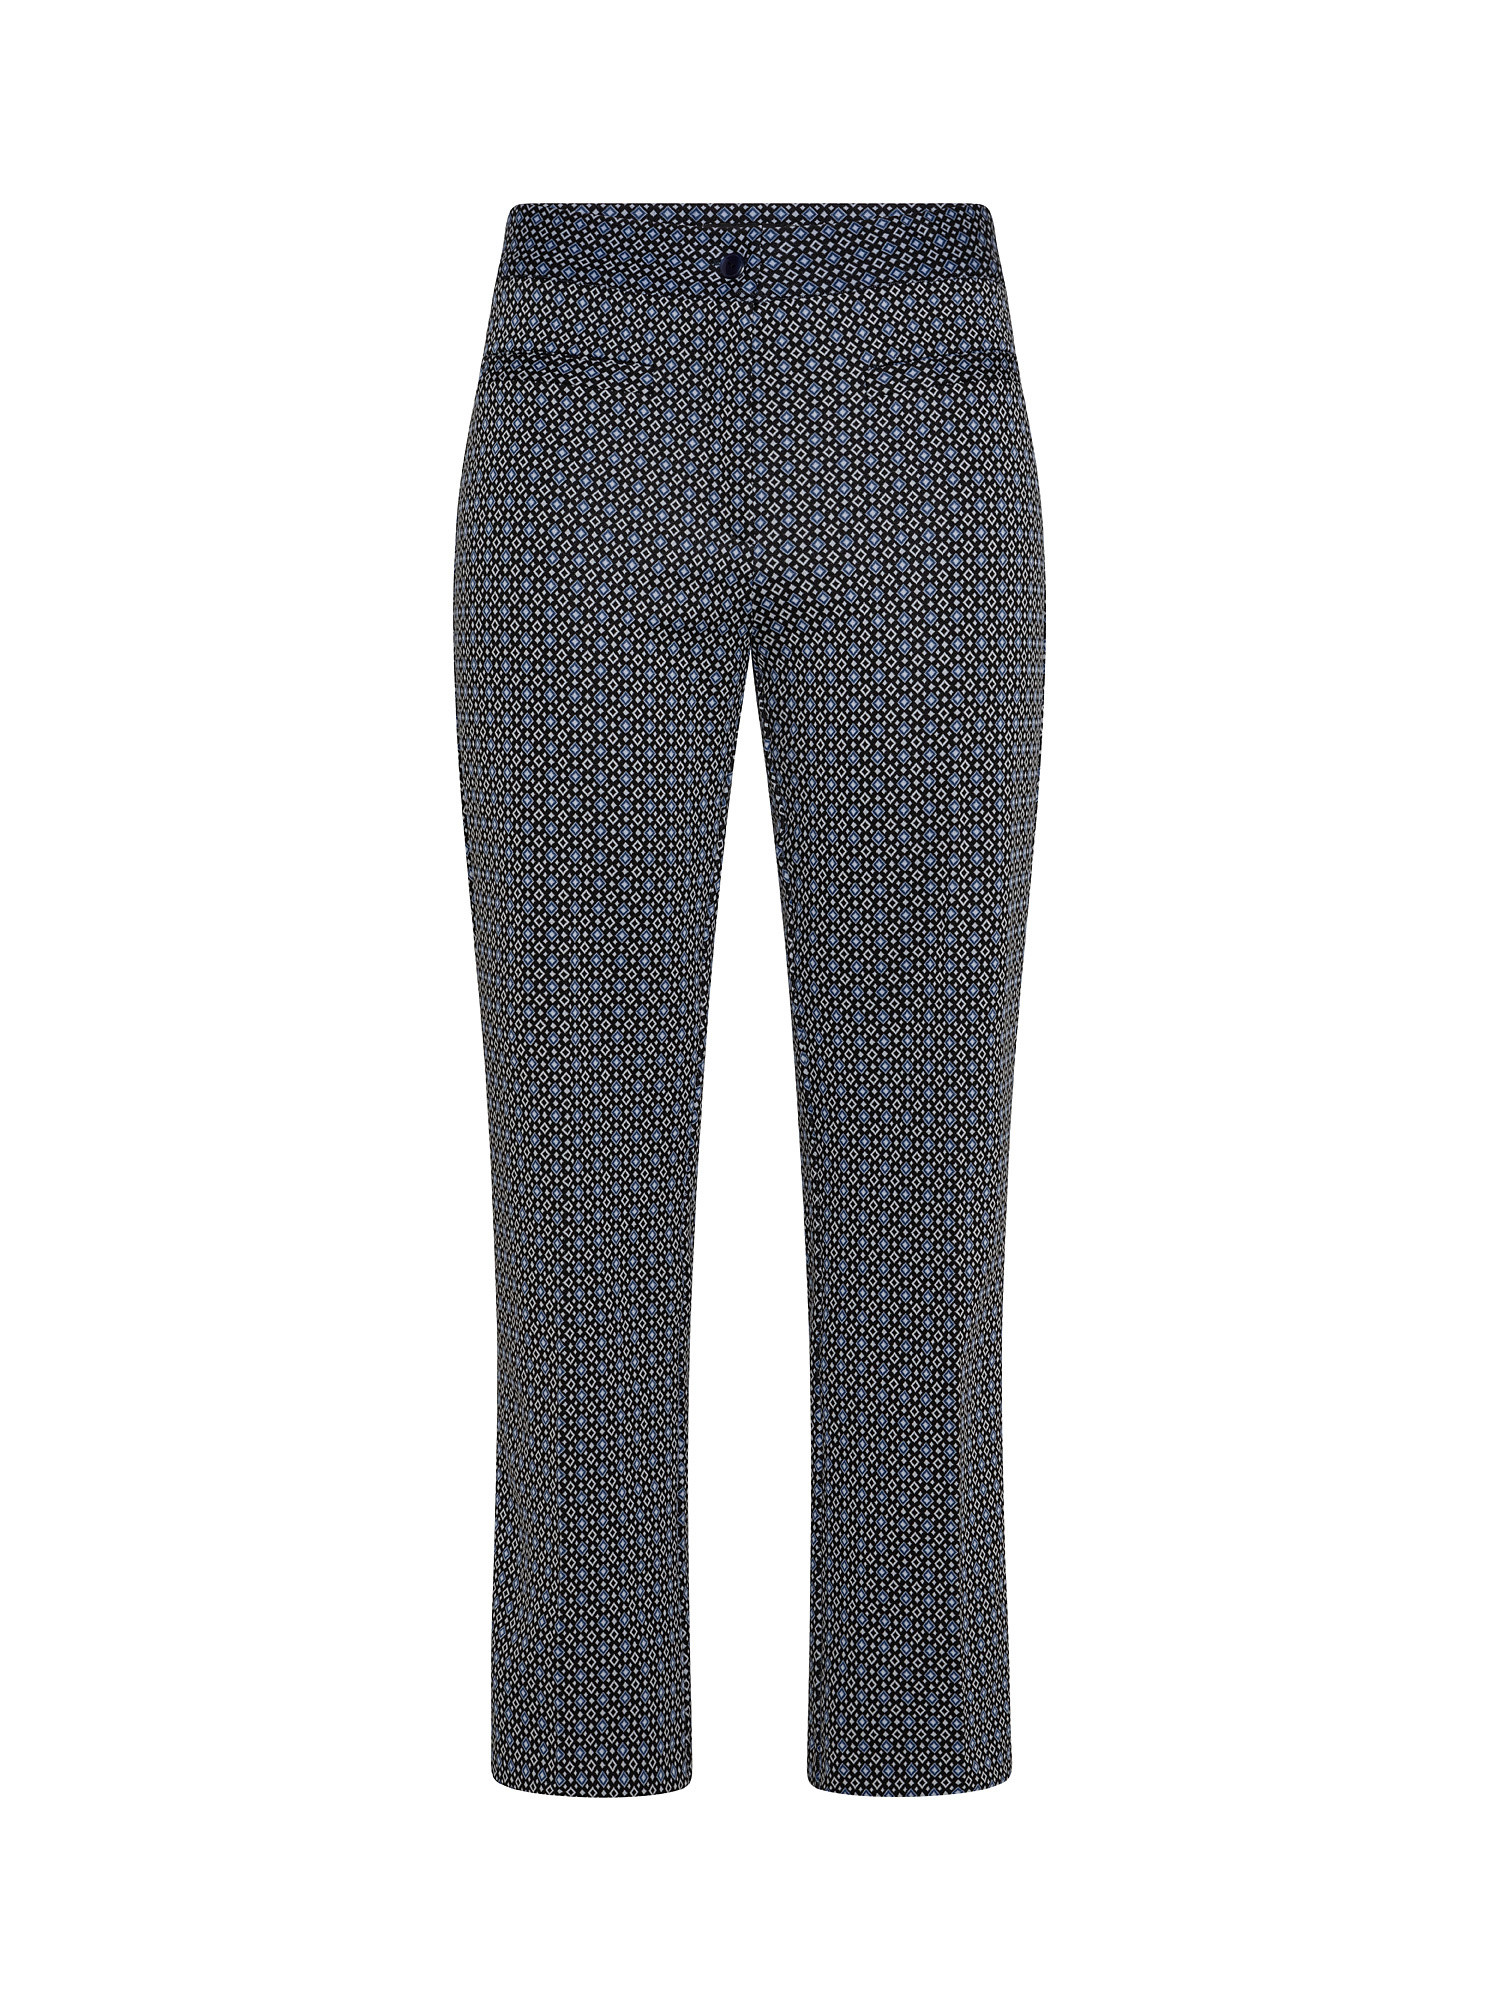 Trousers with pattern, Blue, large image number 0